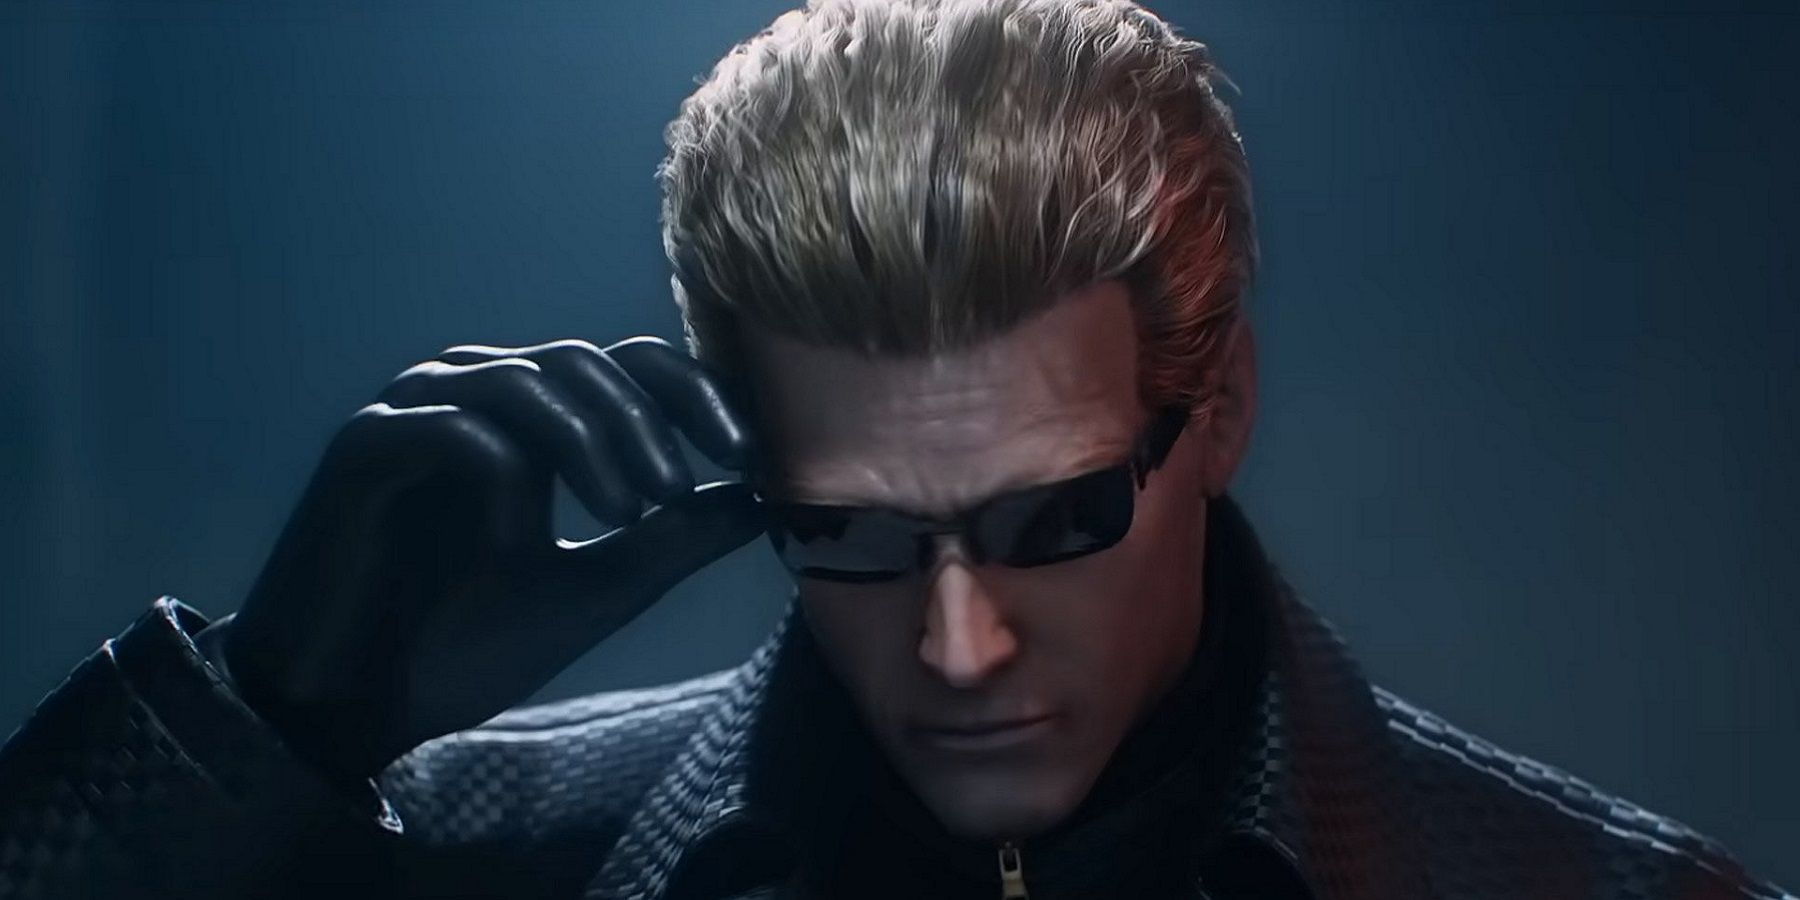 Image showing Resident Evil's Albert Wesker wearing sunglasses and a dark trench coat.